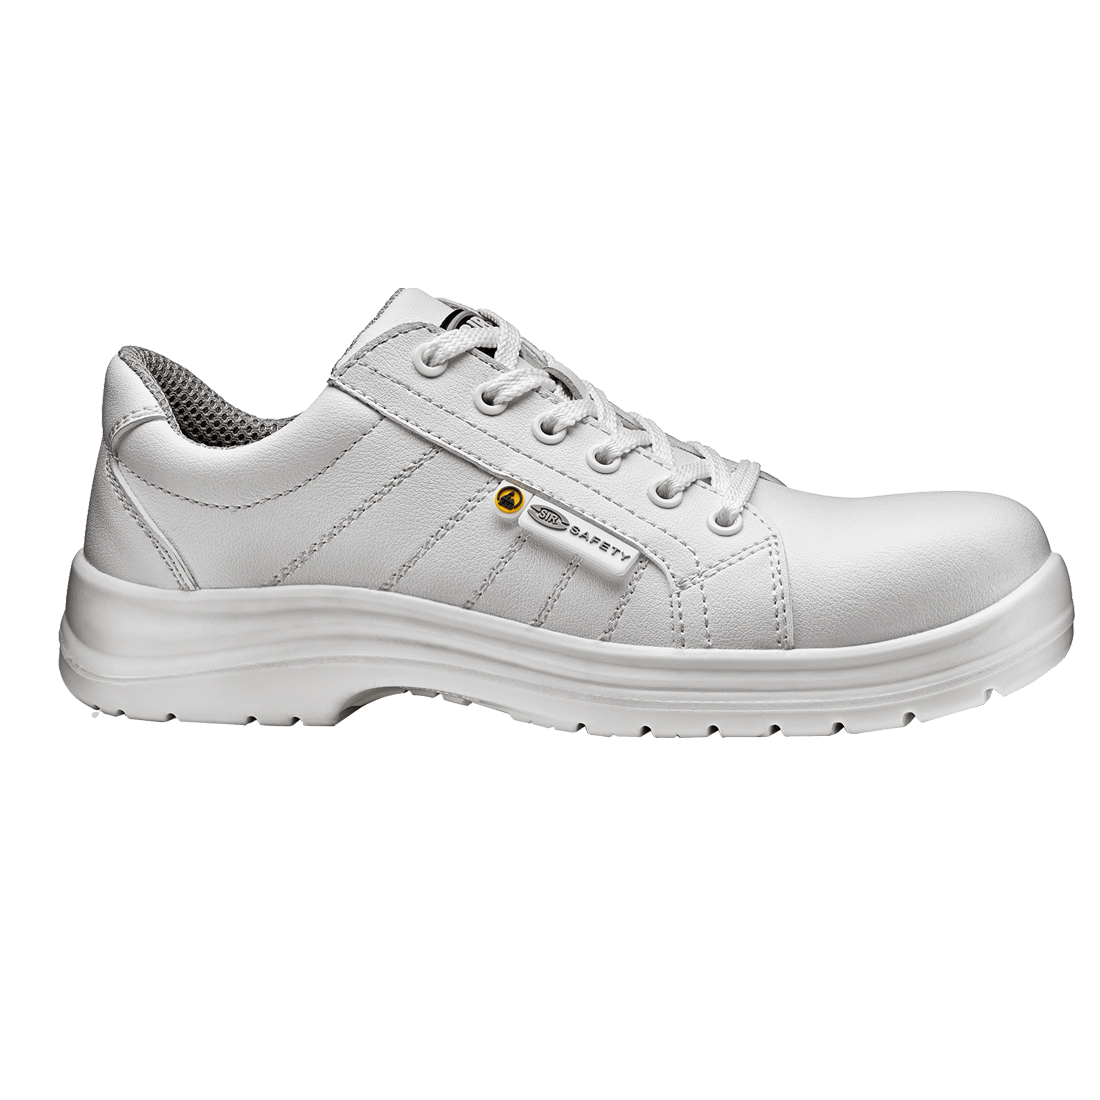 WHITE FOBIA LOW SHOE | System Sir Safety